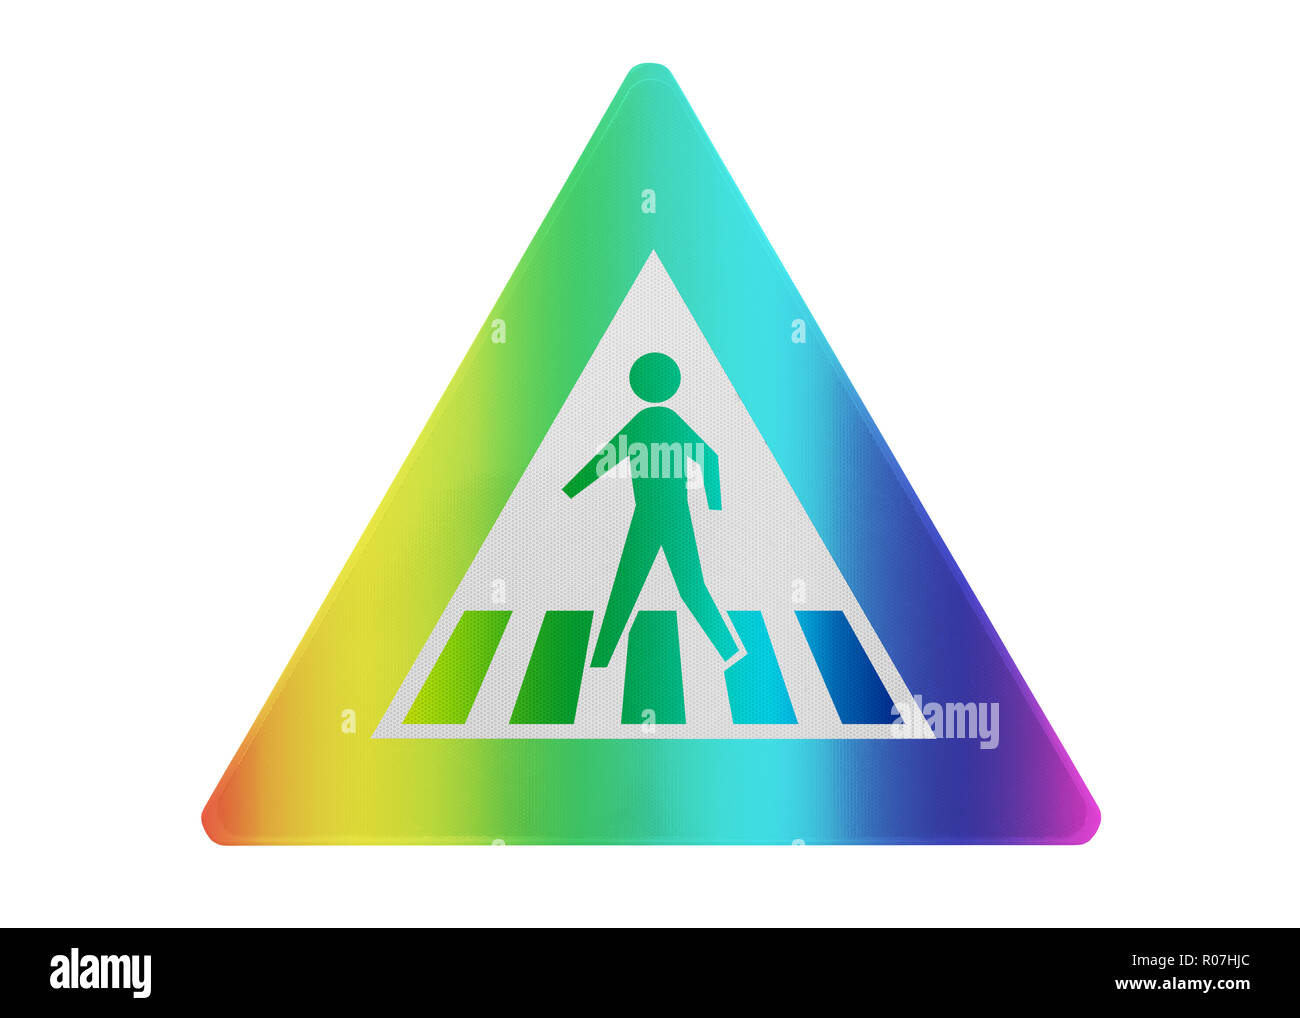 Traffic sign isolated - Pedestrian crossing - Rainbow colored Stock Photo